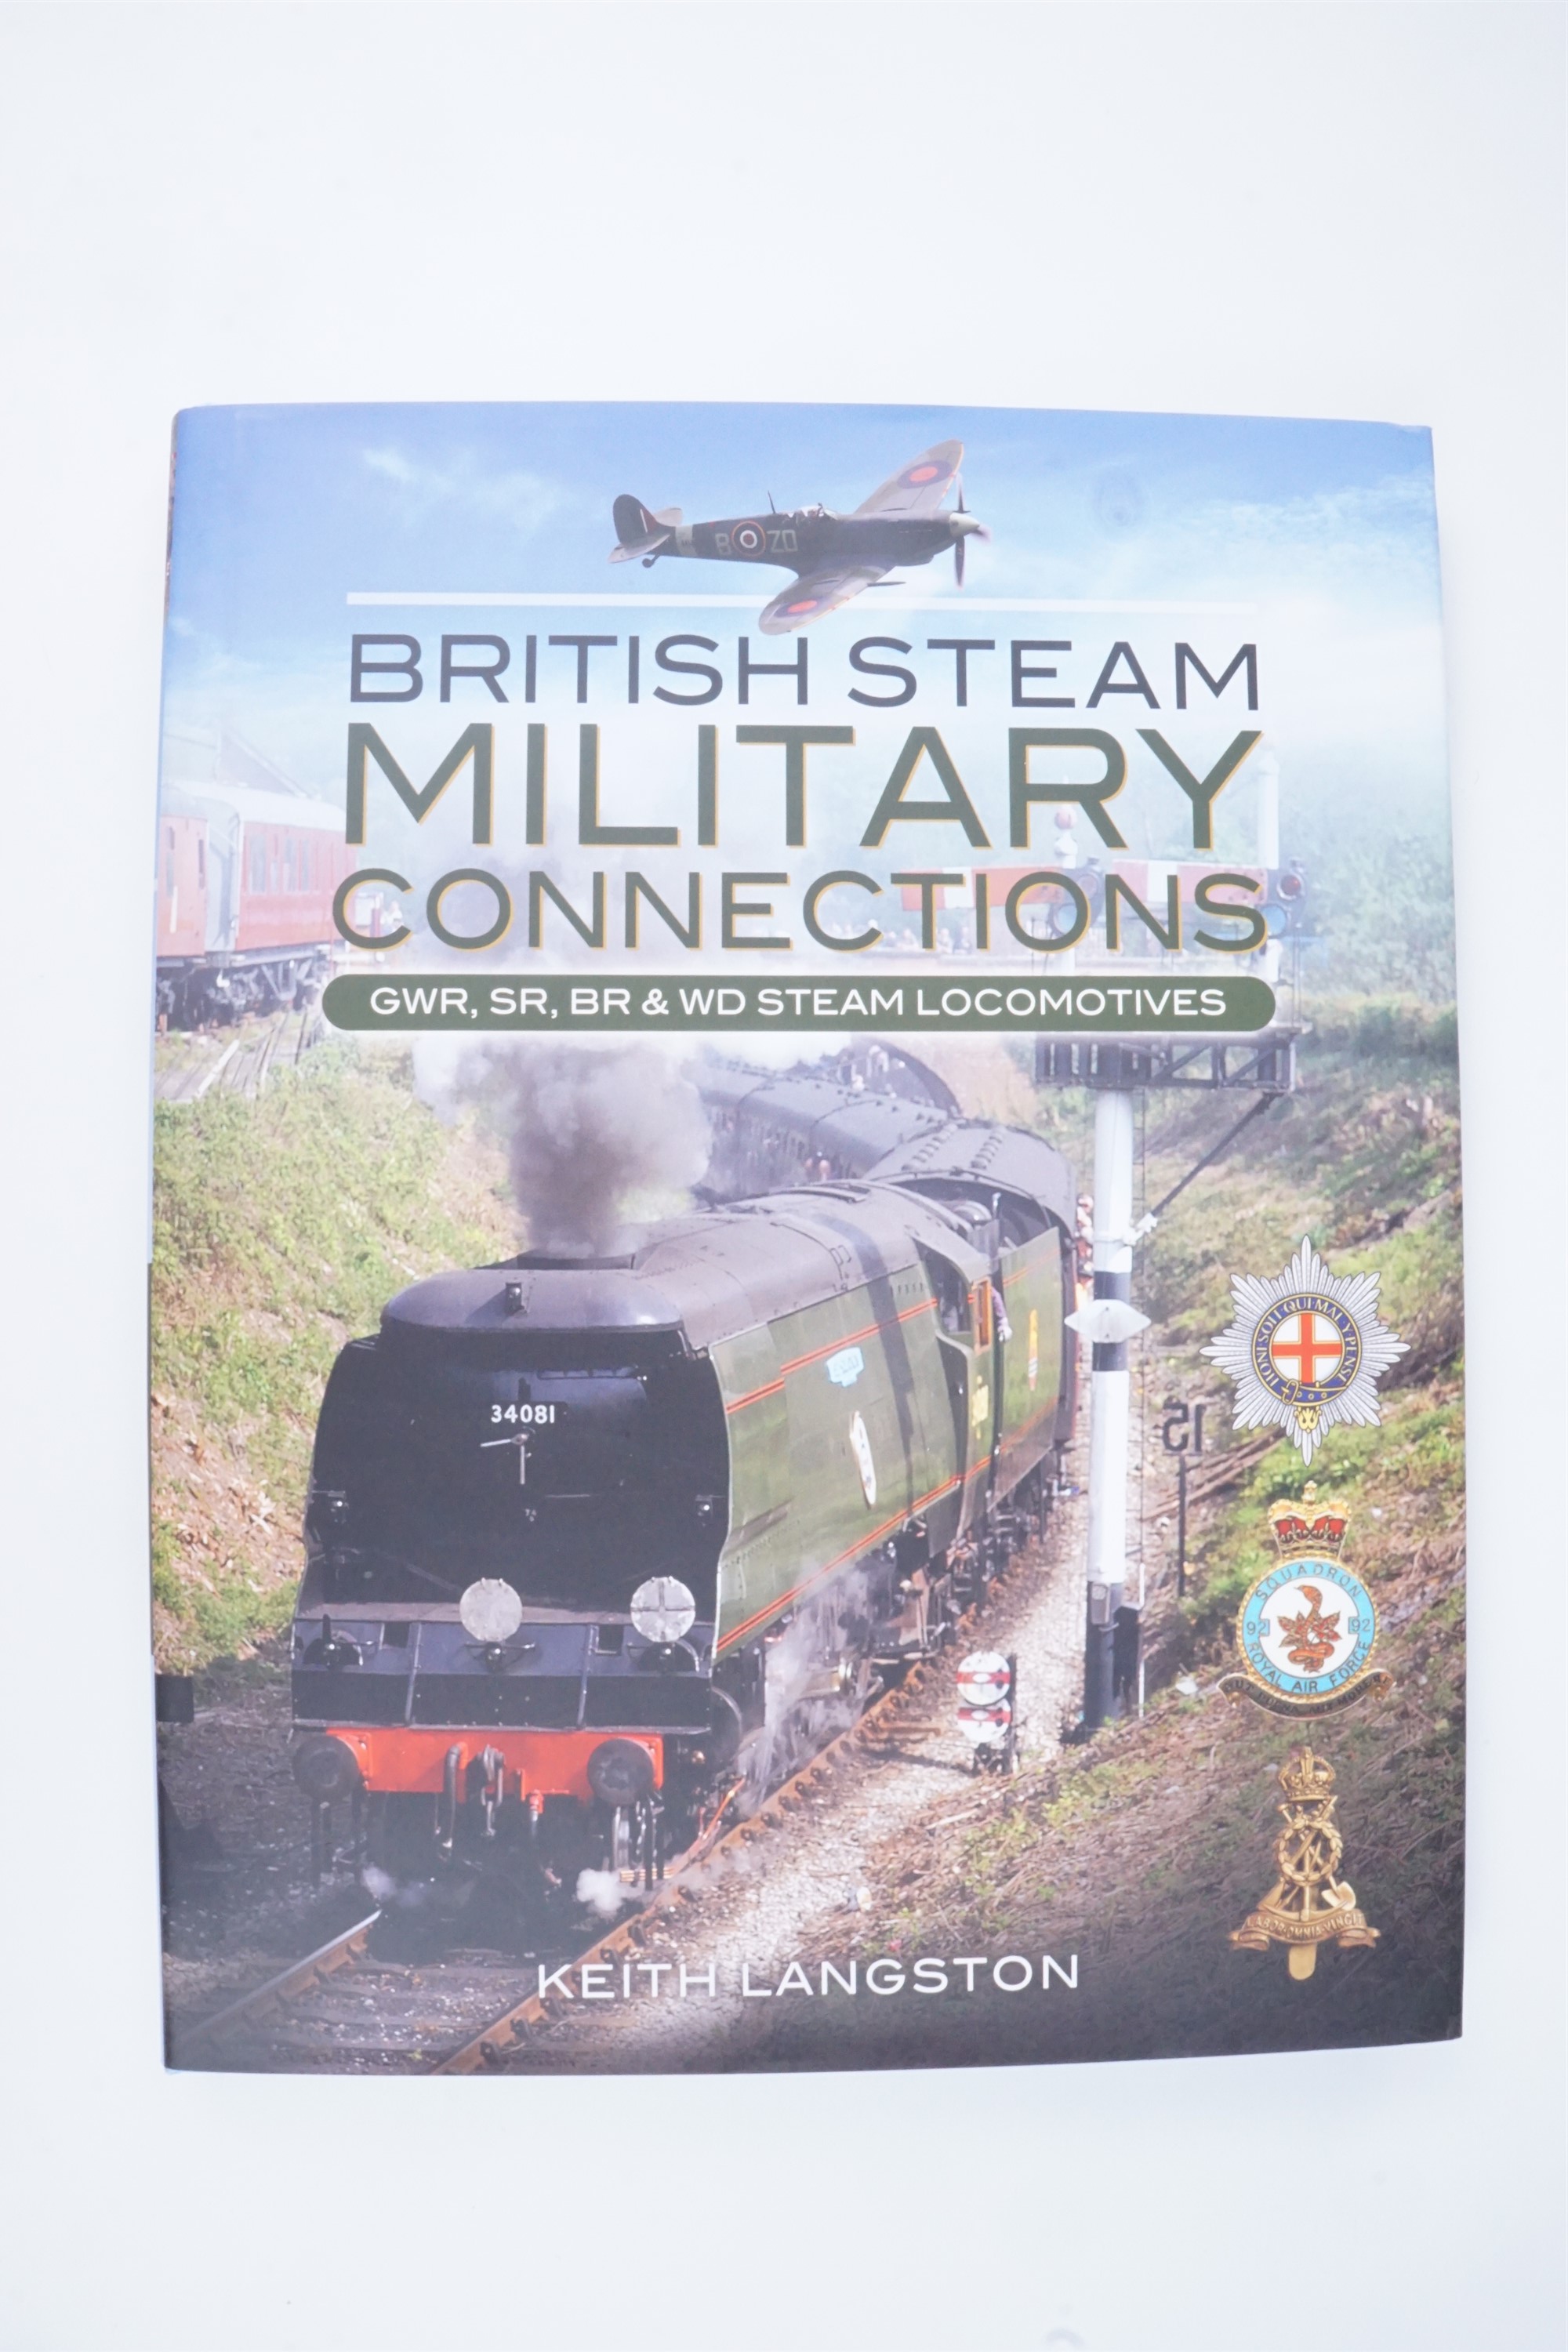 Keith Langston, 'British Steam Military Connections, GWR, SR, and WD steam locomotives', hardback